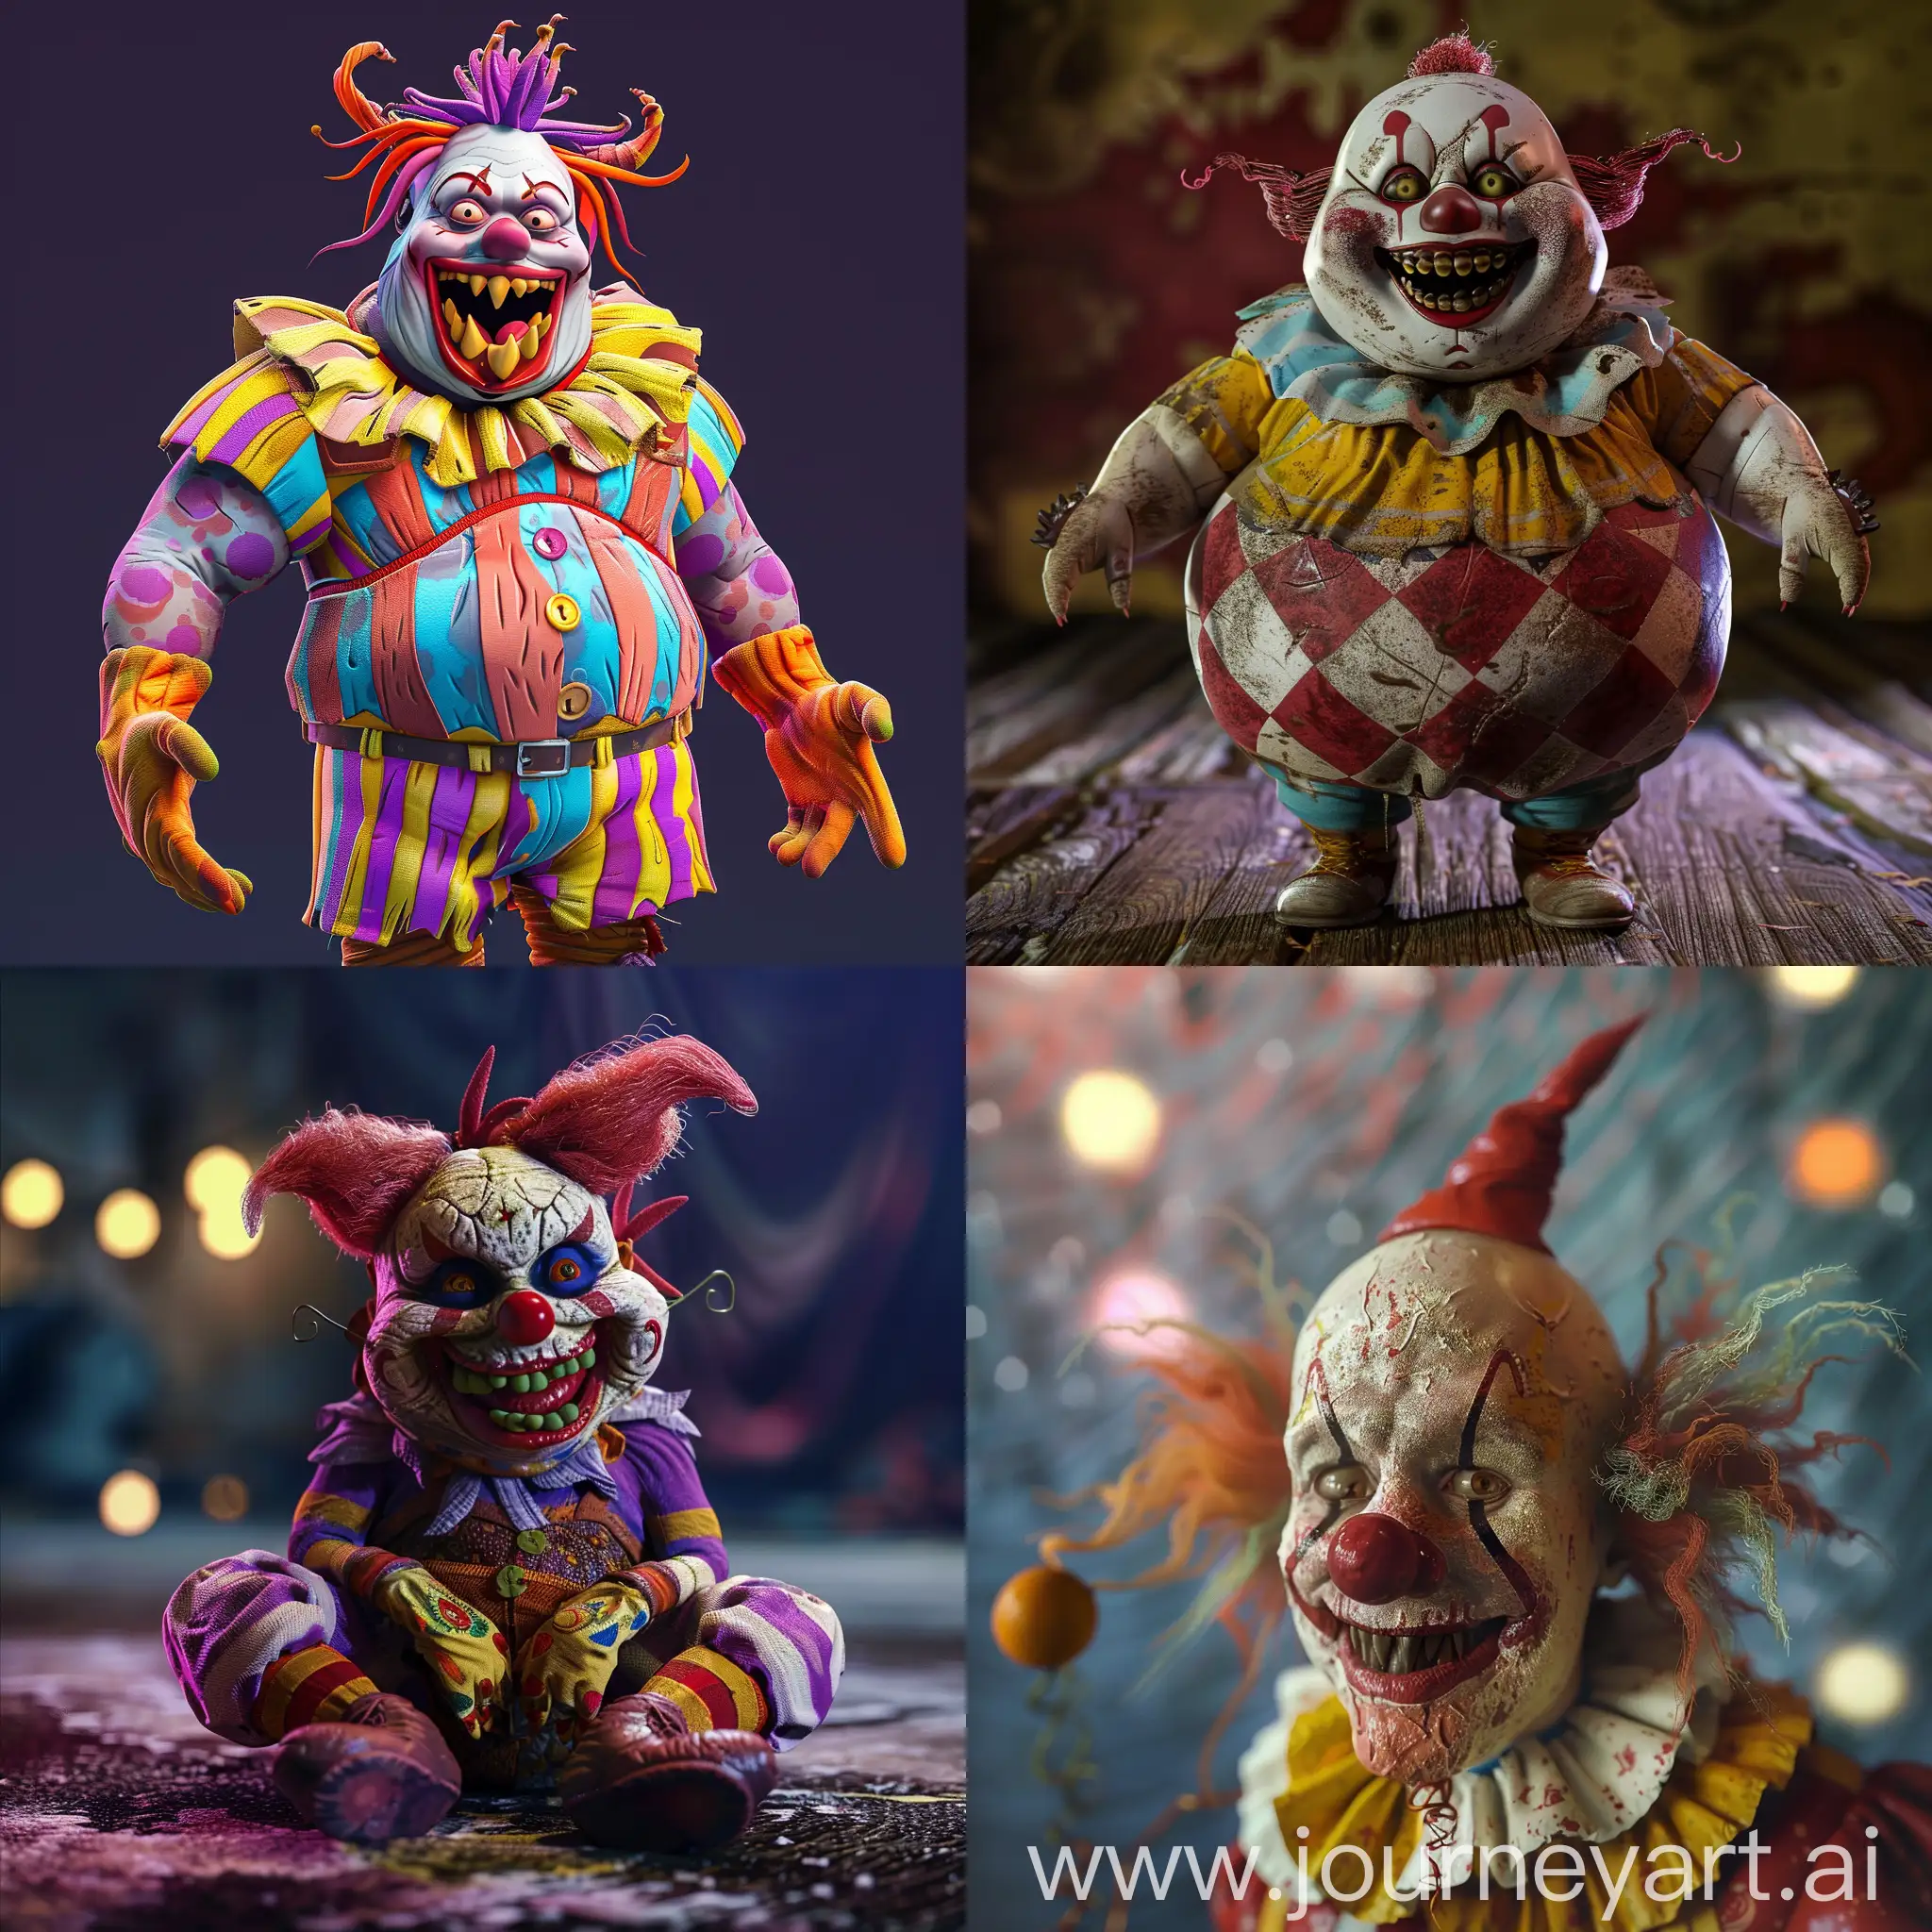 Dropsy-the-Clown-Whimsical-Character-Portrayal-in-Gameinspired-Photo-Style